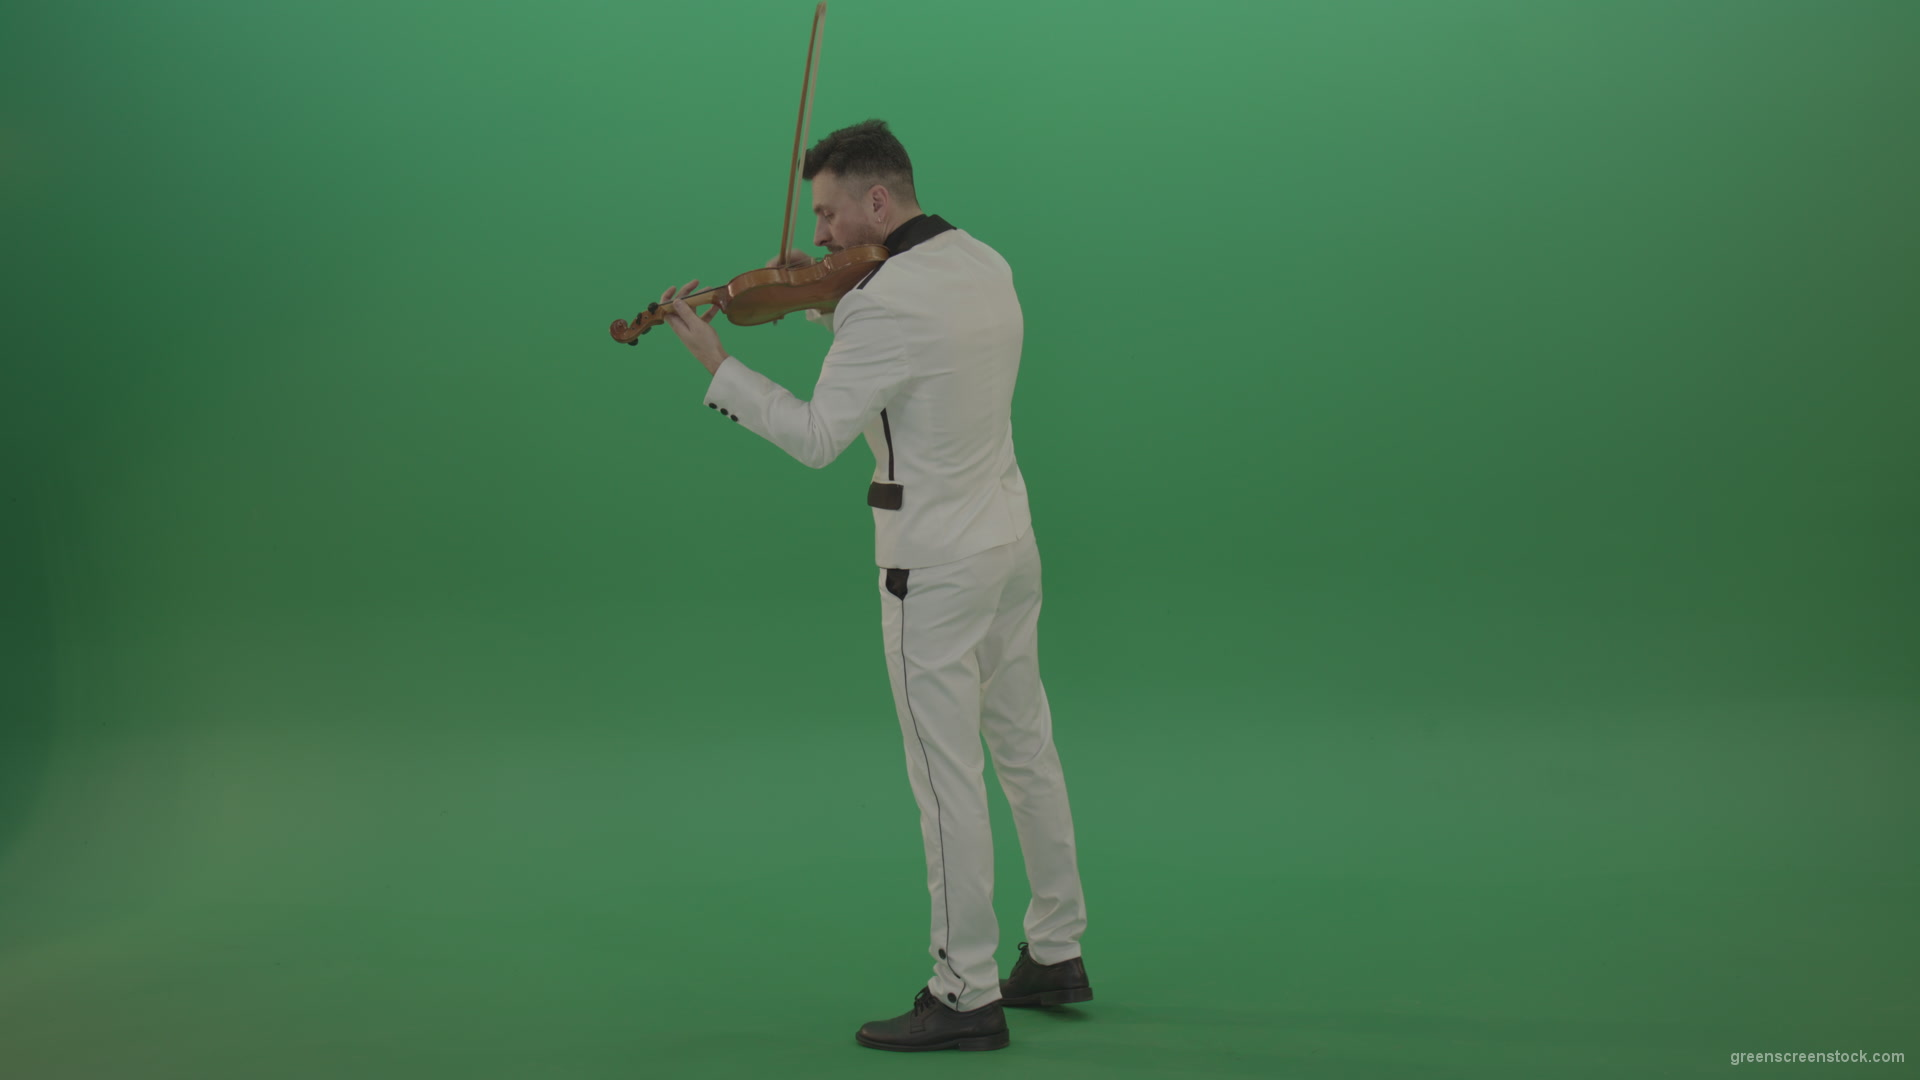 Full-size-Classic-orchestra-man-in-white-wear-play-violin-strings-music-instrument-isolated-on-green-screen-back-side-view_001 Green Screen Stock